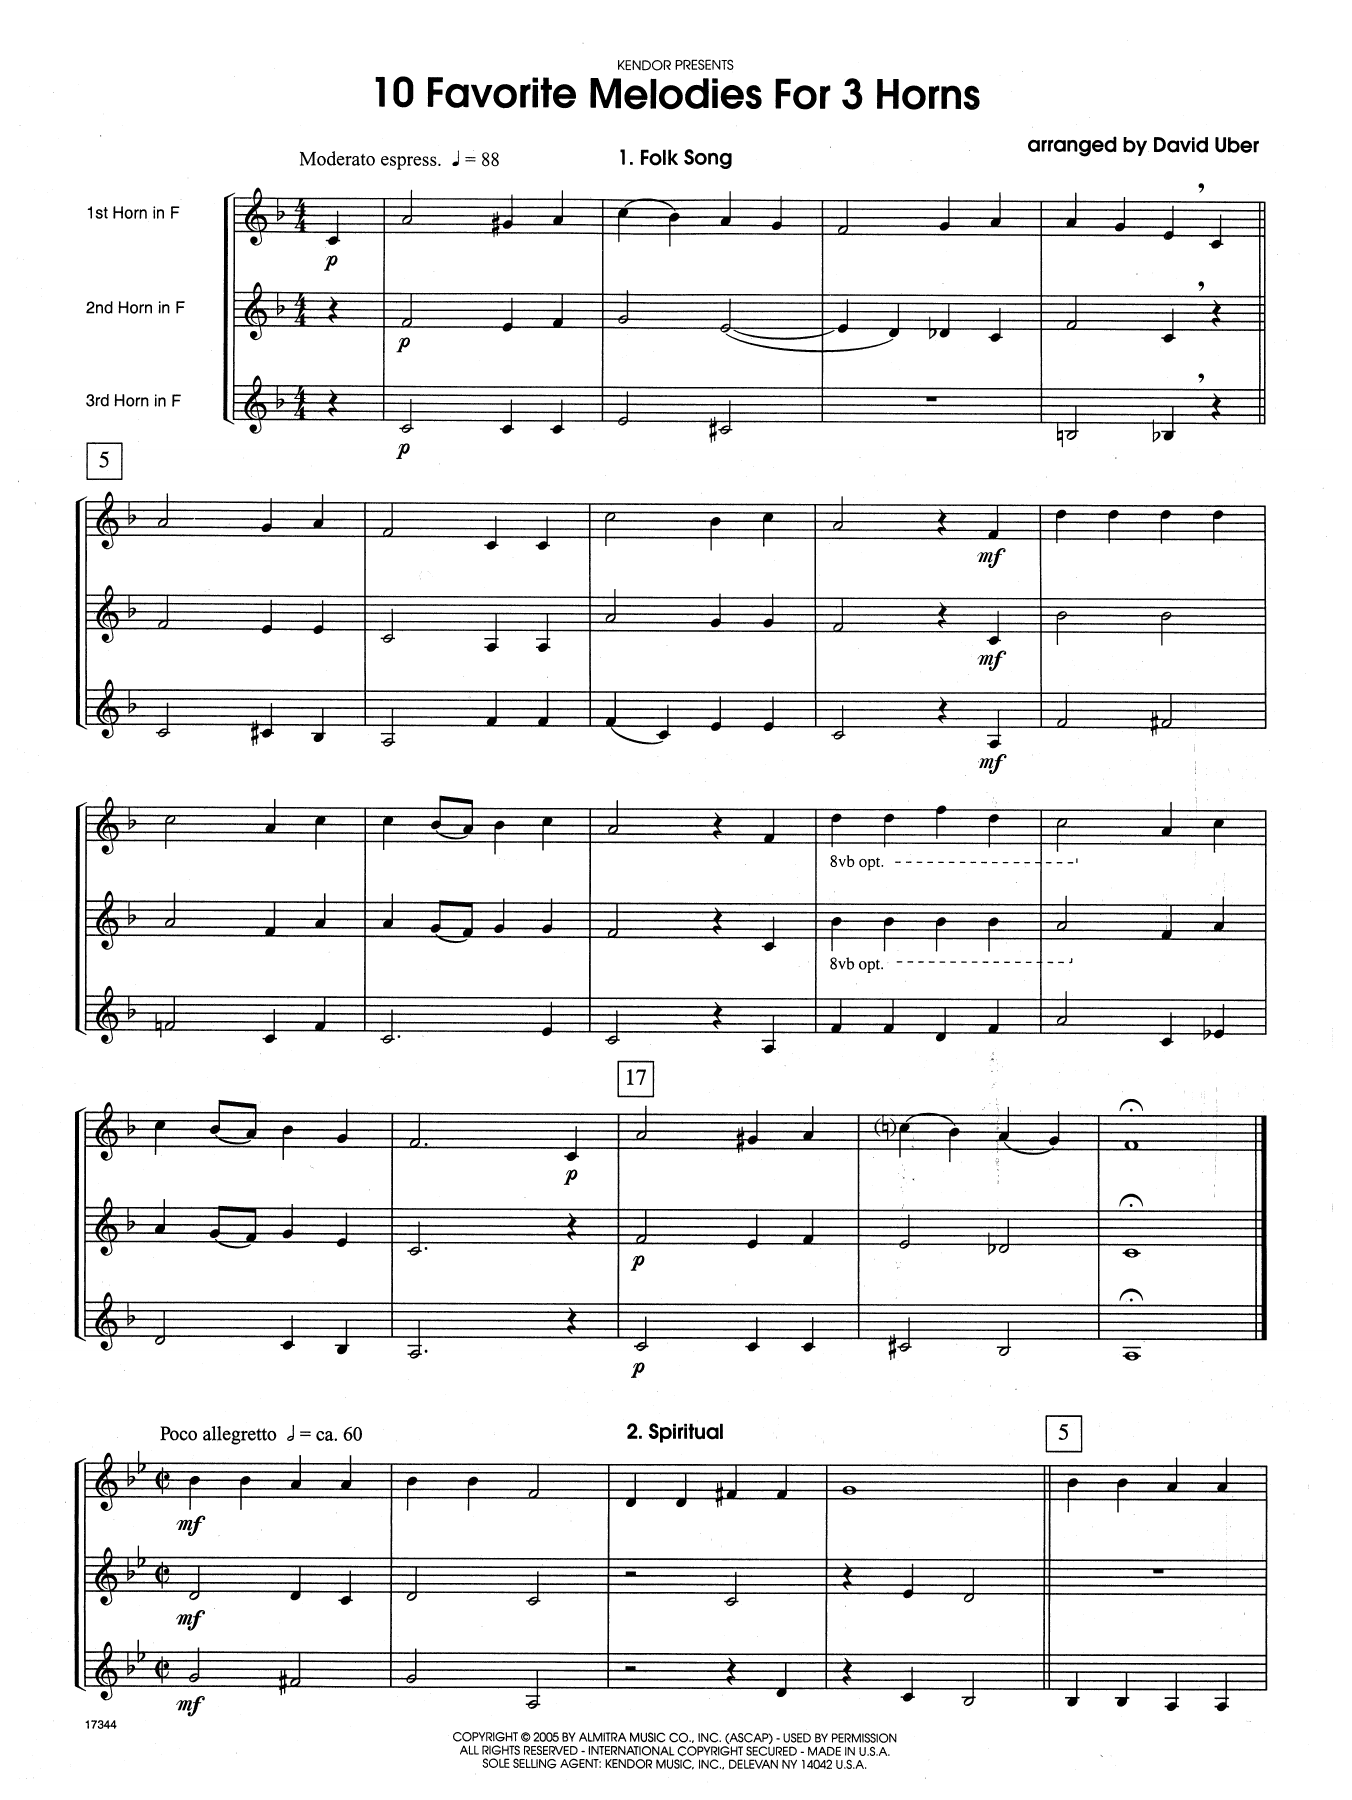 David Uber 10 Favorite Melodies For 3 Horns - Full Score sheet music notes and chords. Download Printable PDF.